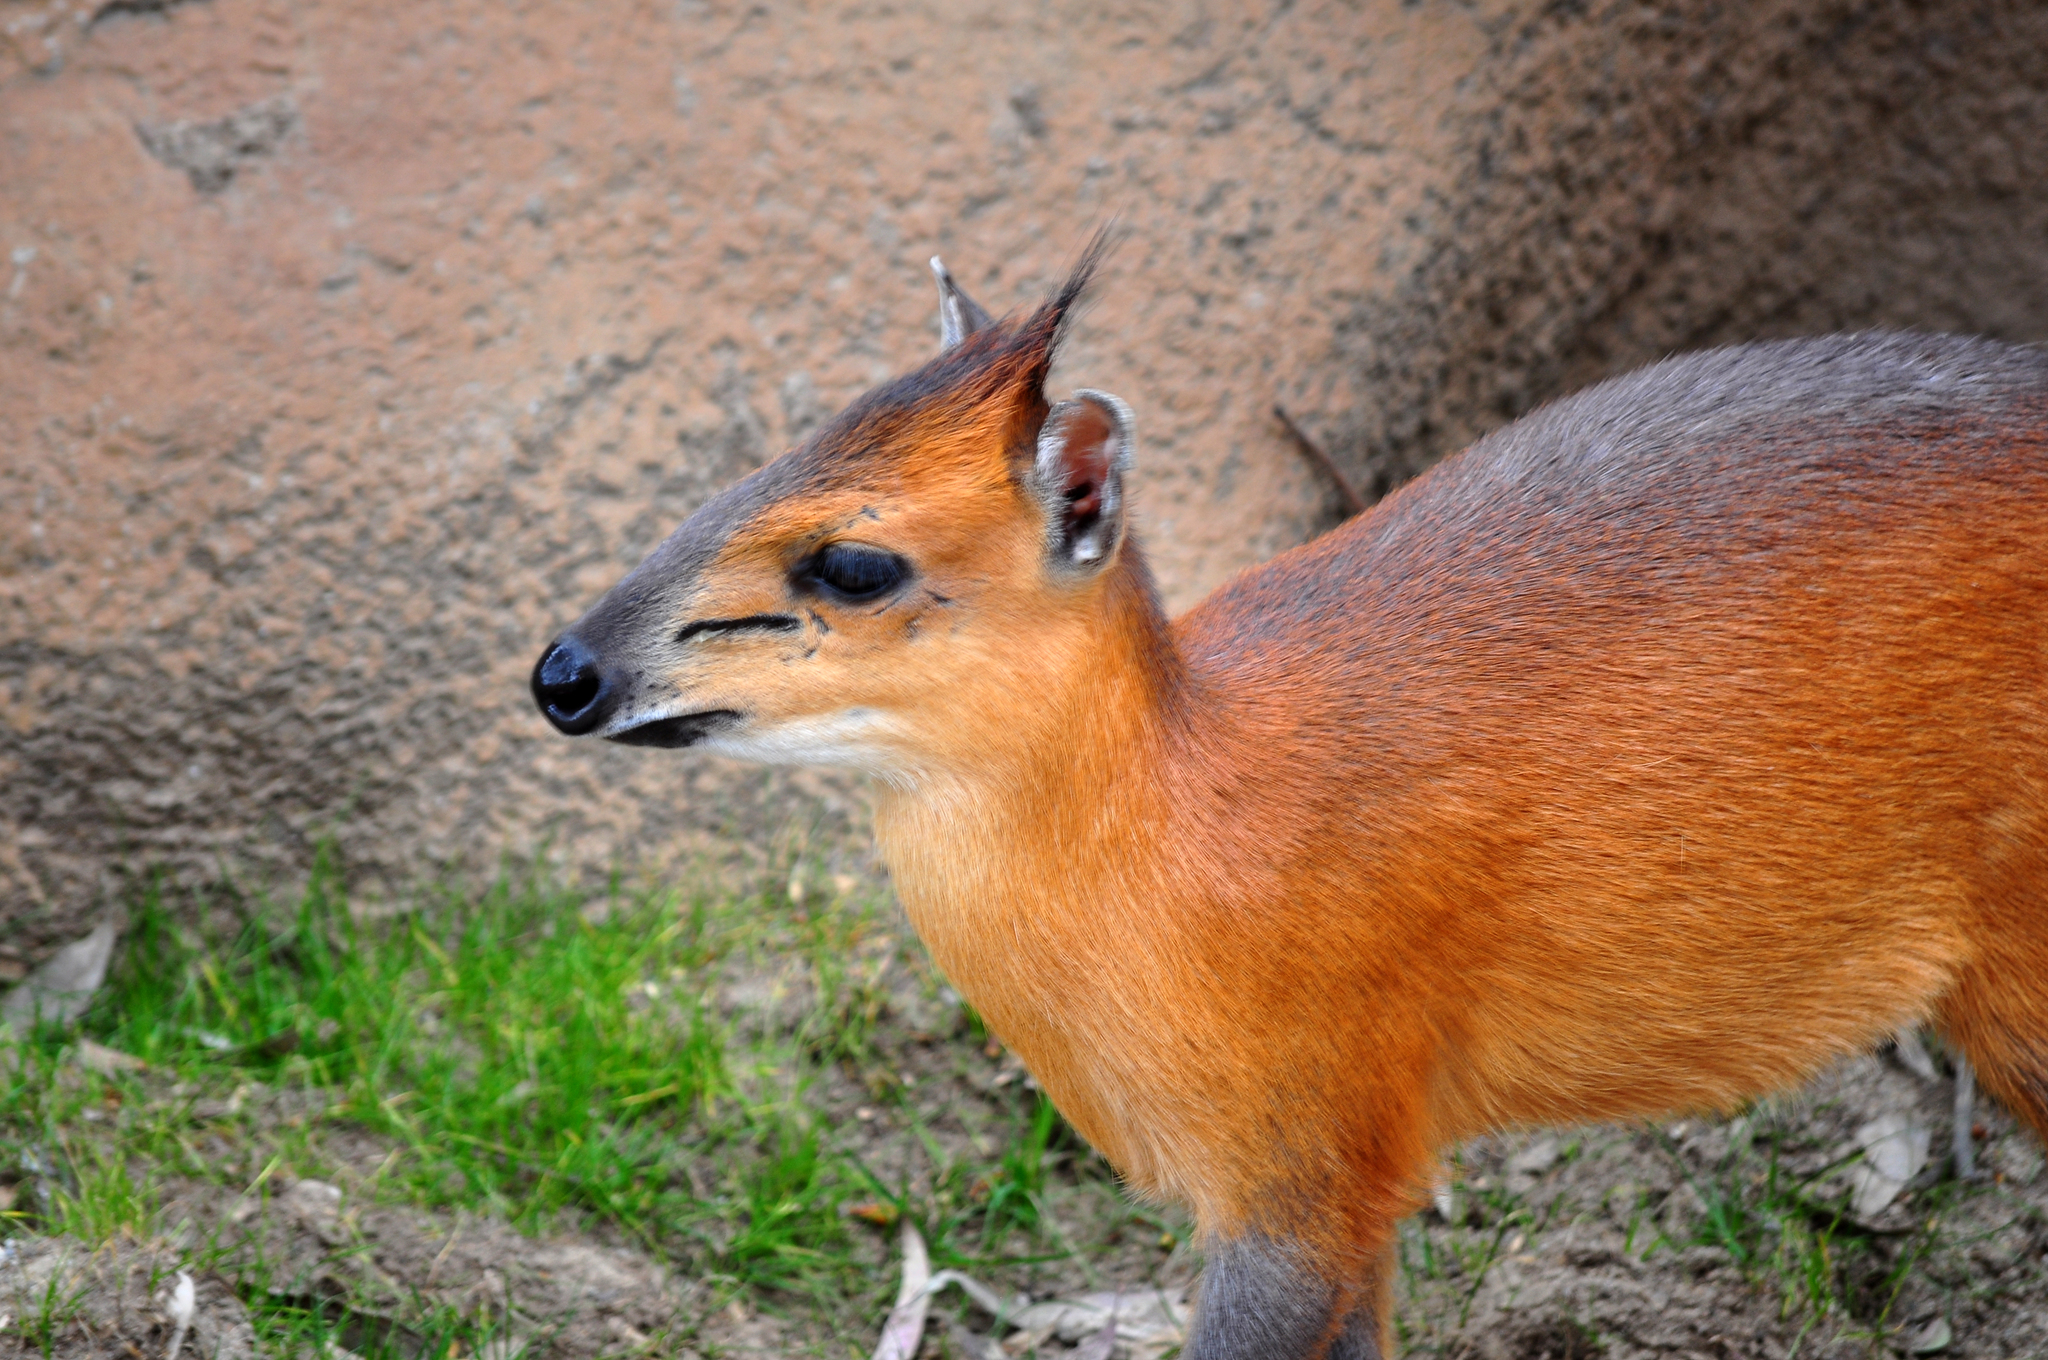 Red-flanked Duiker - Encyclopedia of Life